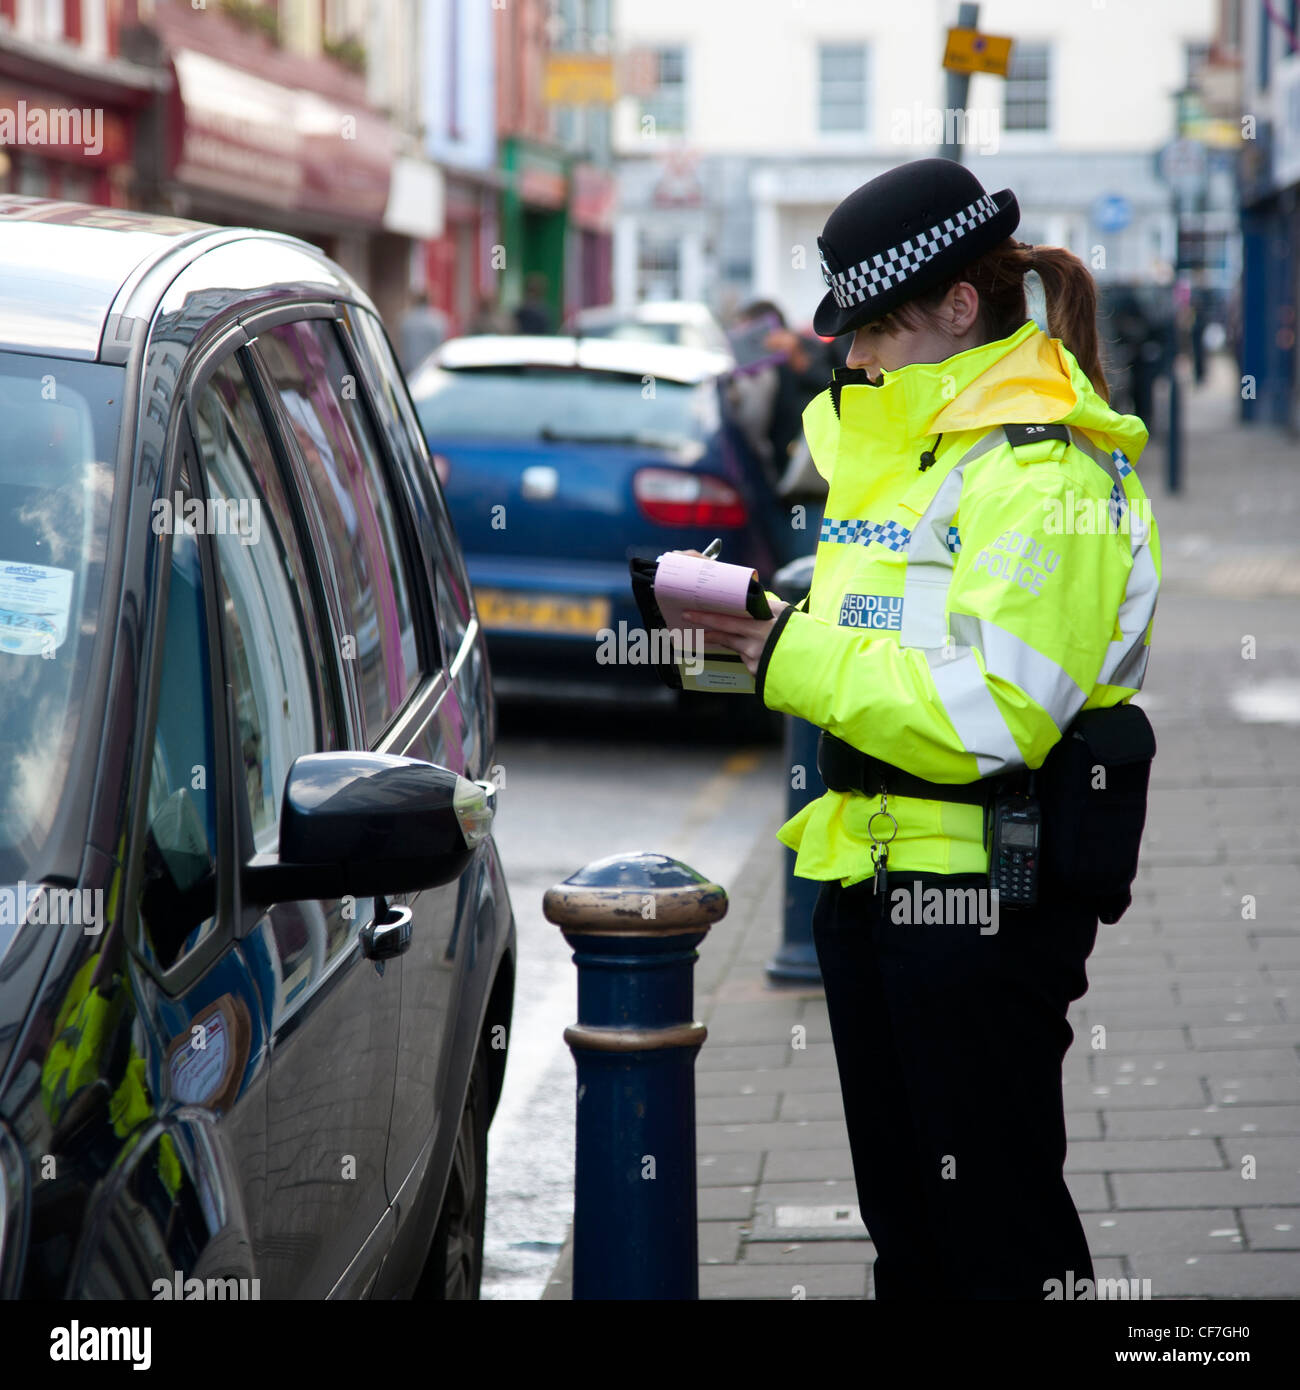 A Woman Dyfed Powys Police Officer Issuing Parking Ticket To A Car Parked On Double Yellow Lines